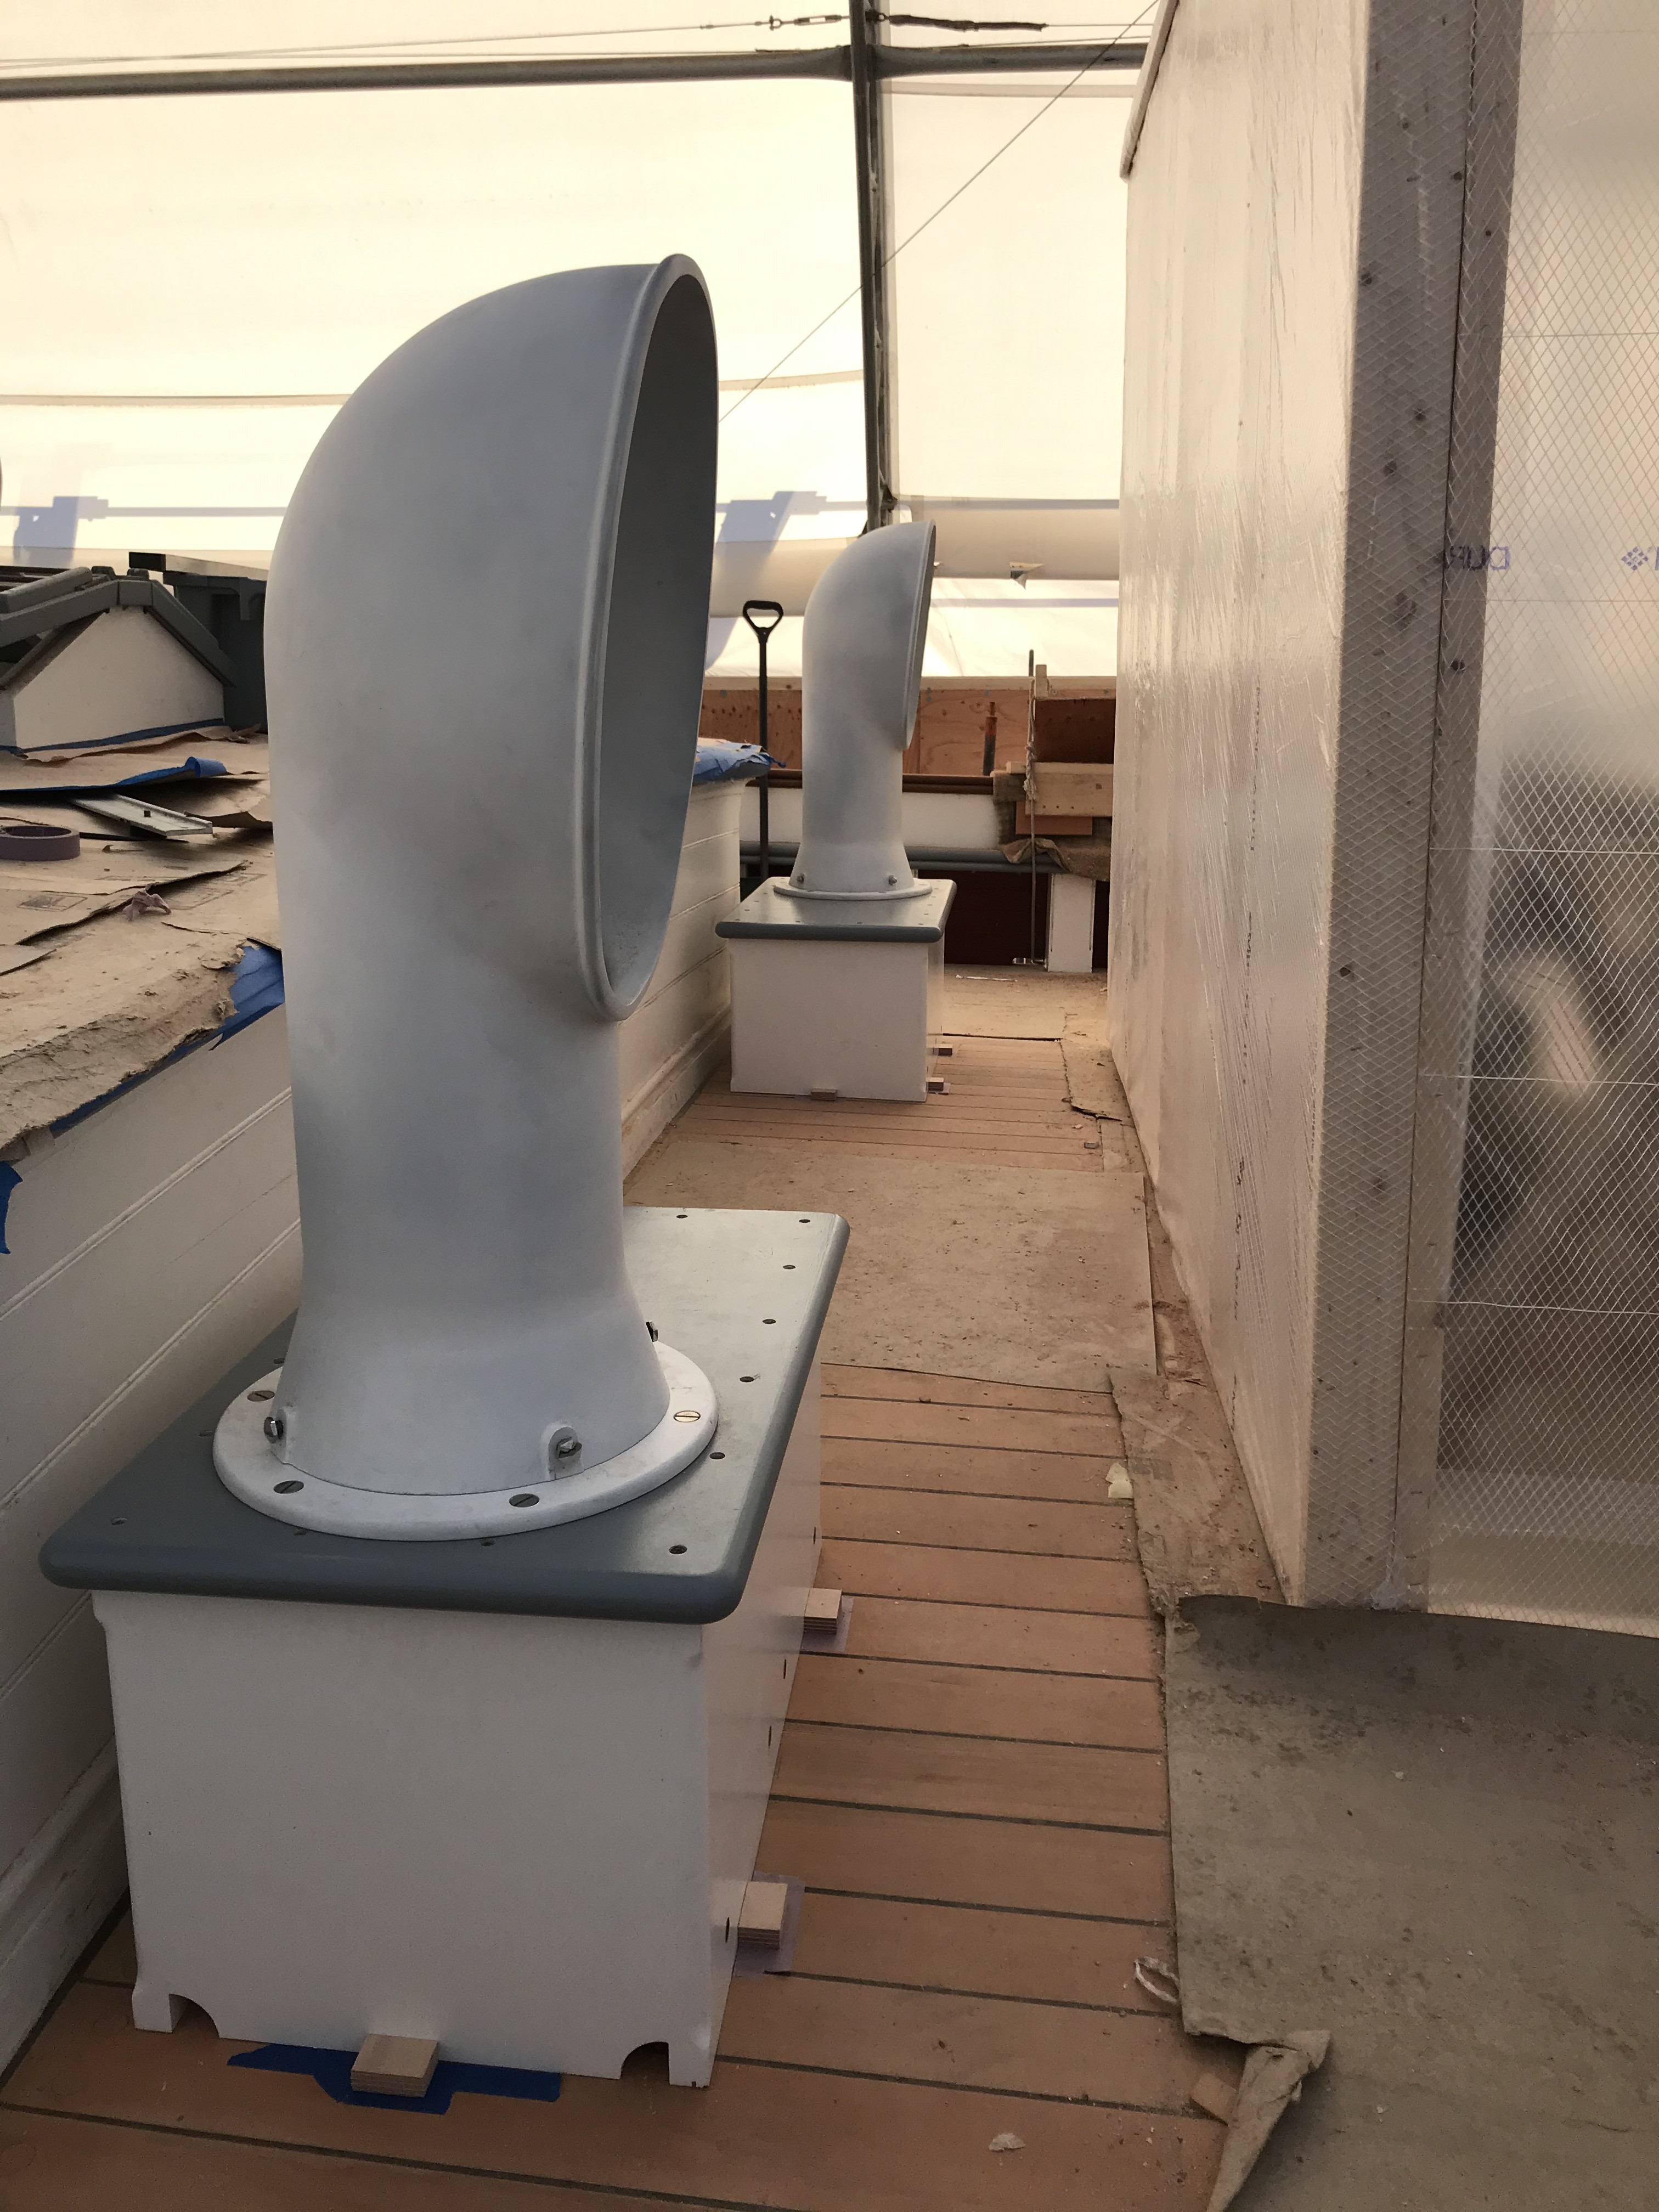 These large ventilators have been placed and installed on top of their respective dorade boxes.  These are quite large, and look terrific as a pair.  The dorade boxes were built specifically to match the exact camber of the deck while remaining level along the top surface.  Unlike other ventilators on the ship, these two have a very important purpose.  These provide a specific volume of air to adequately ventilate the Engine Room.  The port side ventilator is designated as the intake, while the starboard side will be mated to an exhaust fan in the engine compartment to cycle the air through the space.  Like everything on a ship, they are beautiful but also serve a purpose.